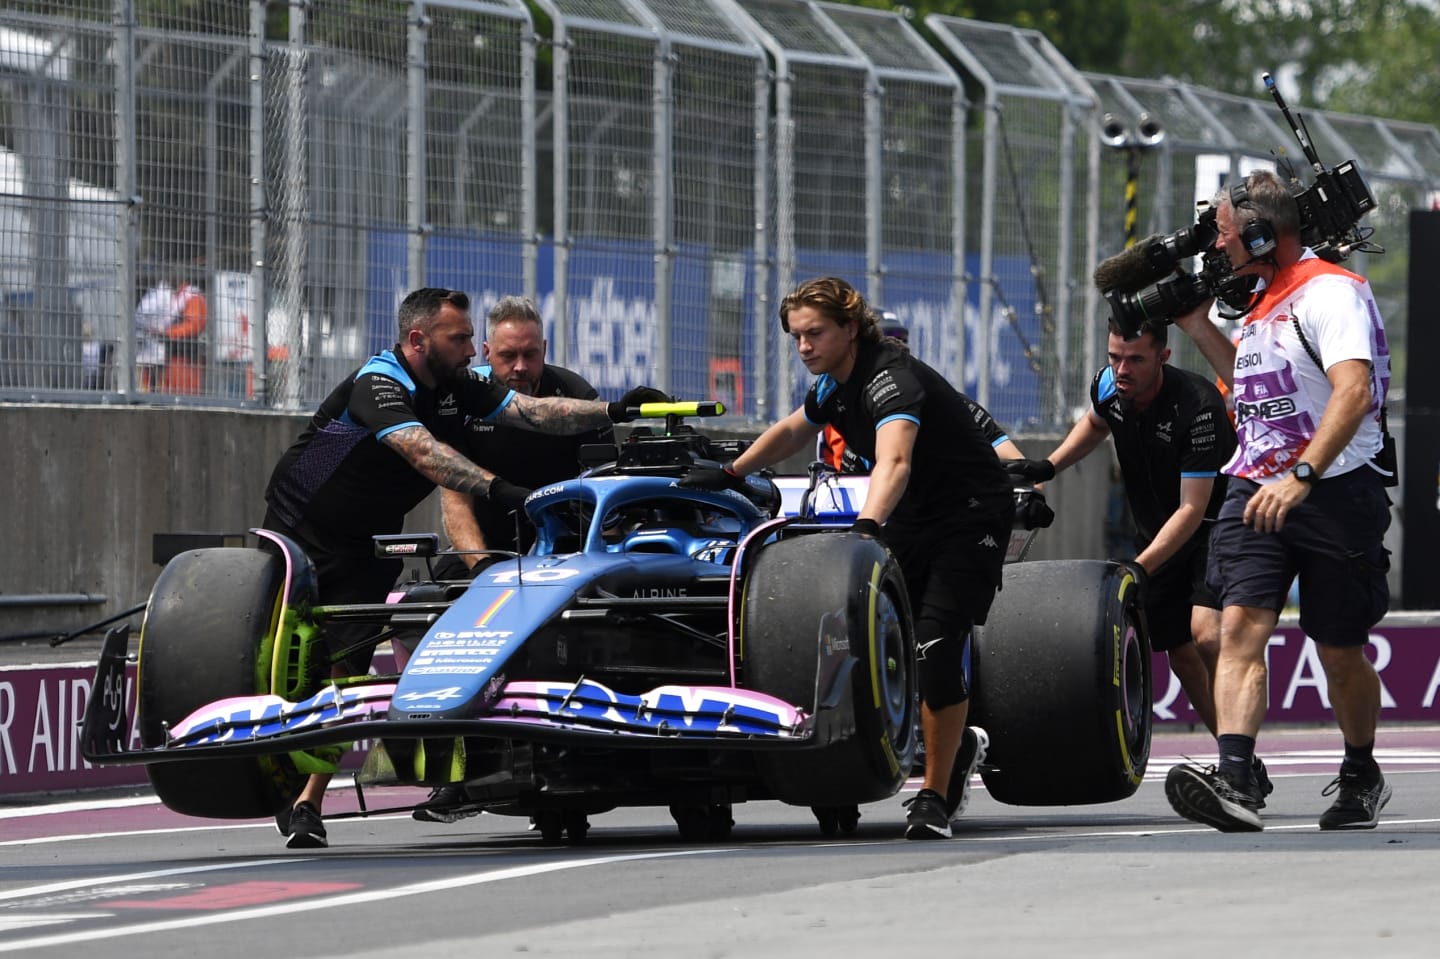 MONTREAL, QUEBEC - JUNE 16: The car of Pierre Gasly of France and Alpine F1 is recovered to the garage after stopping on track during practice ahead of the F1 Grand Prix of Canada at Circuit Gilles Villeneuve on June 16, 2023 in Montreal, Quebec. (Photo by Rudy Carezzevoli/Getty Images)